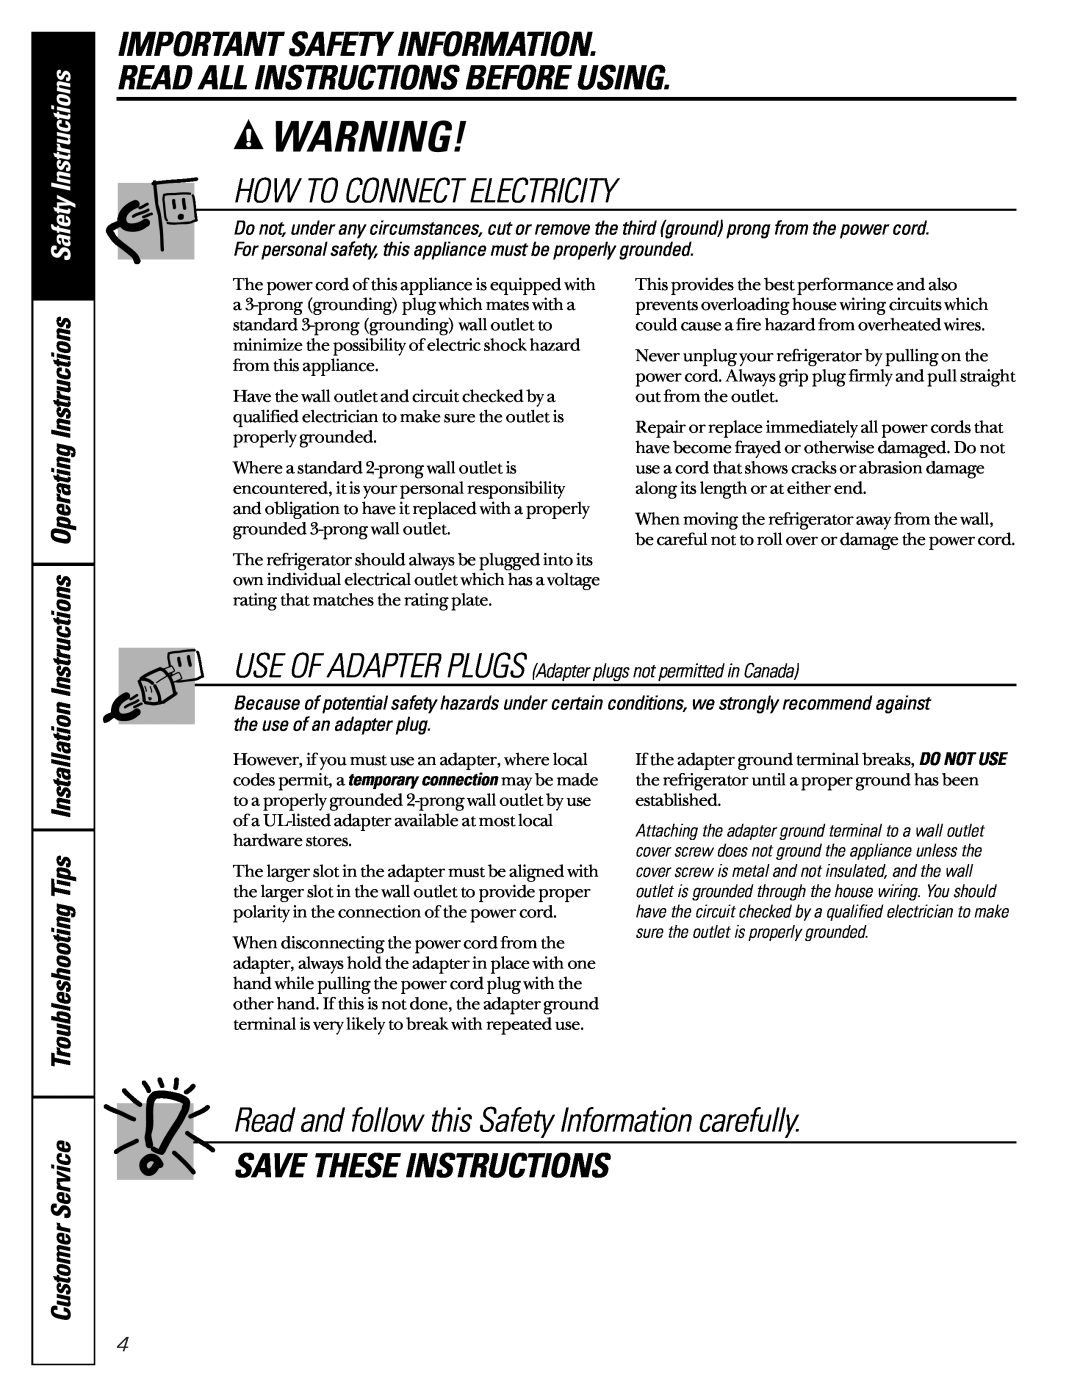 GE TCC18 How To Connect Electricity, Save These Instructions, OperatingInstructions, TroubleshootingTips, CustomerService 